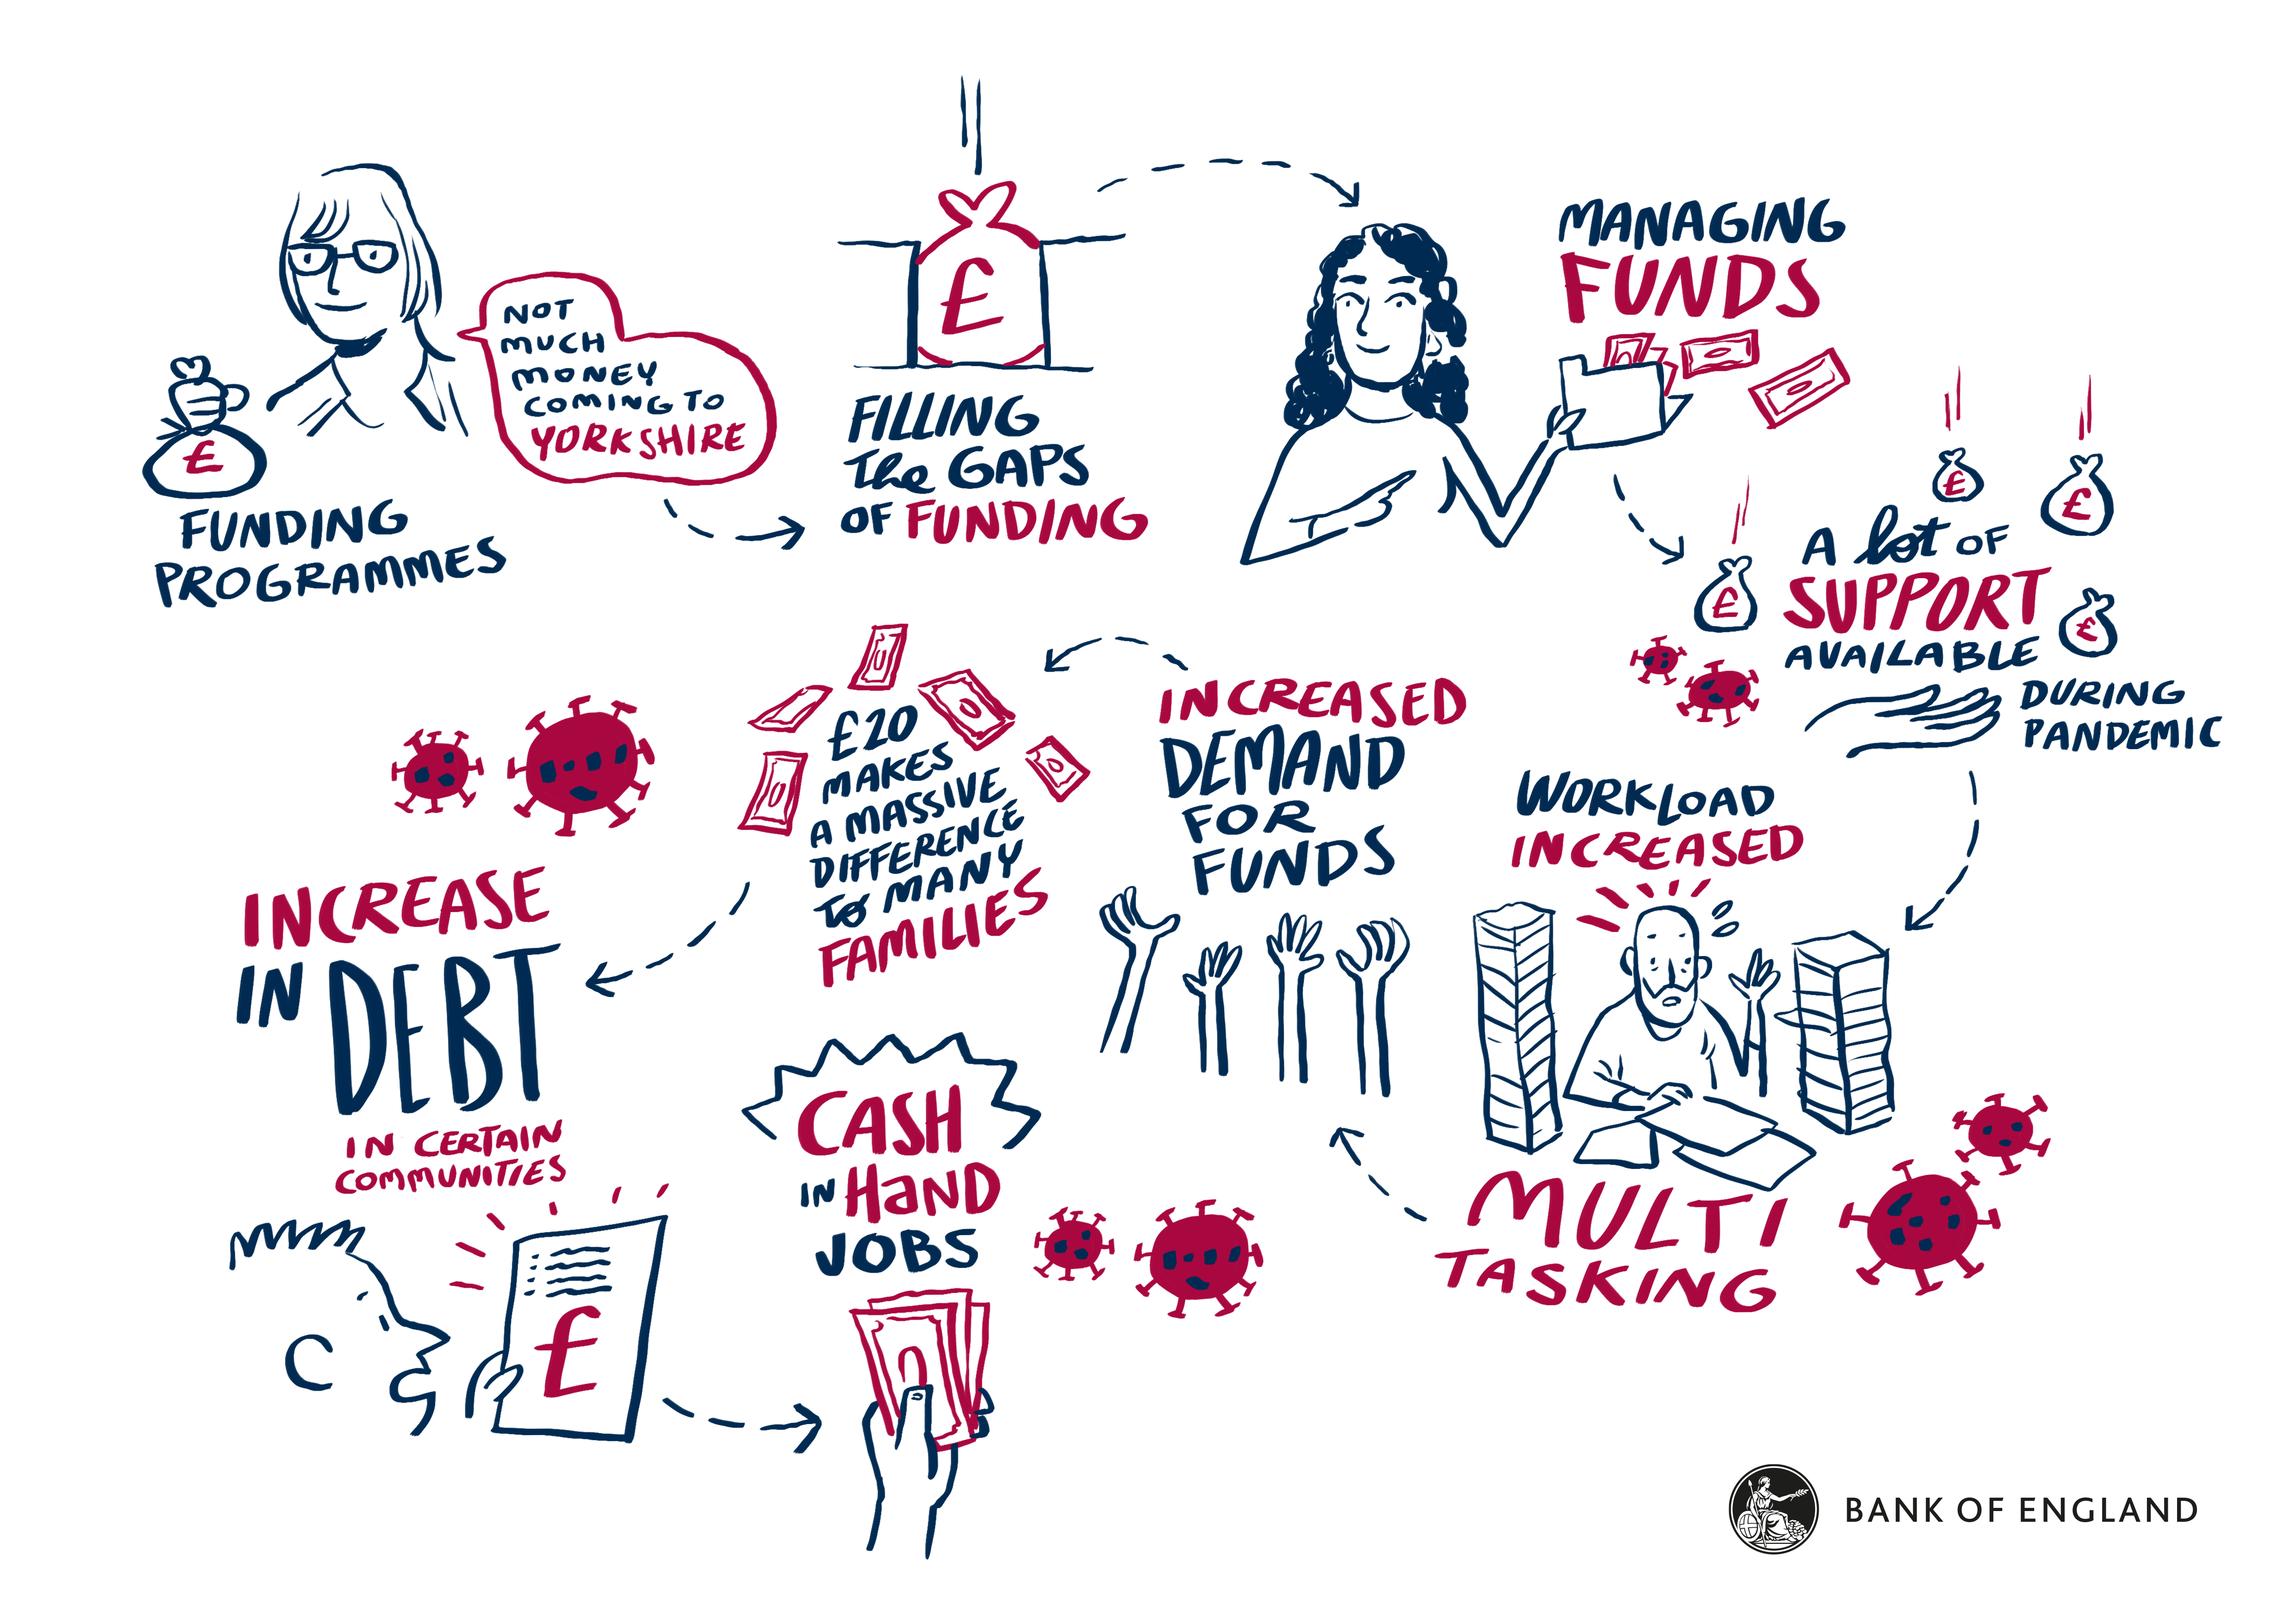 Visual artistic scribe depicting funding and debt